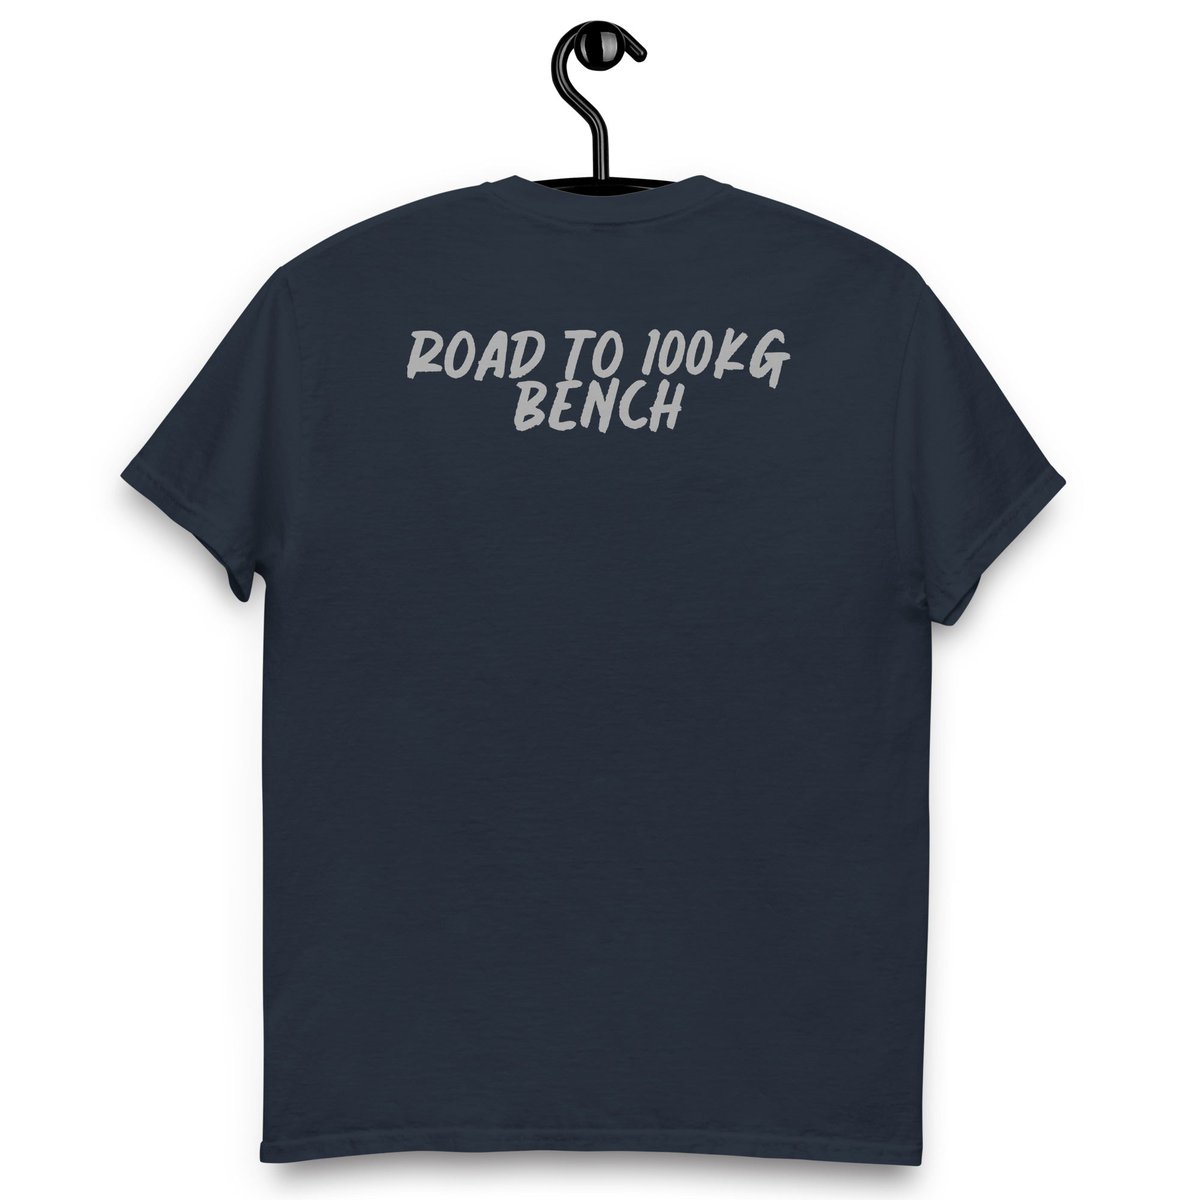 Benching your way to greatness with our 'Road to 100kg Bench Tee'! 💪🏋️‍♂️ Take your workout to the next level in style, click the link to shop now! #GymLife #FitnessGoals #AthleticWear #TrainHard #ShopNow